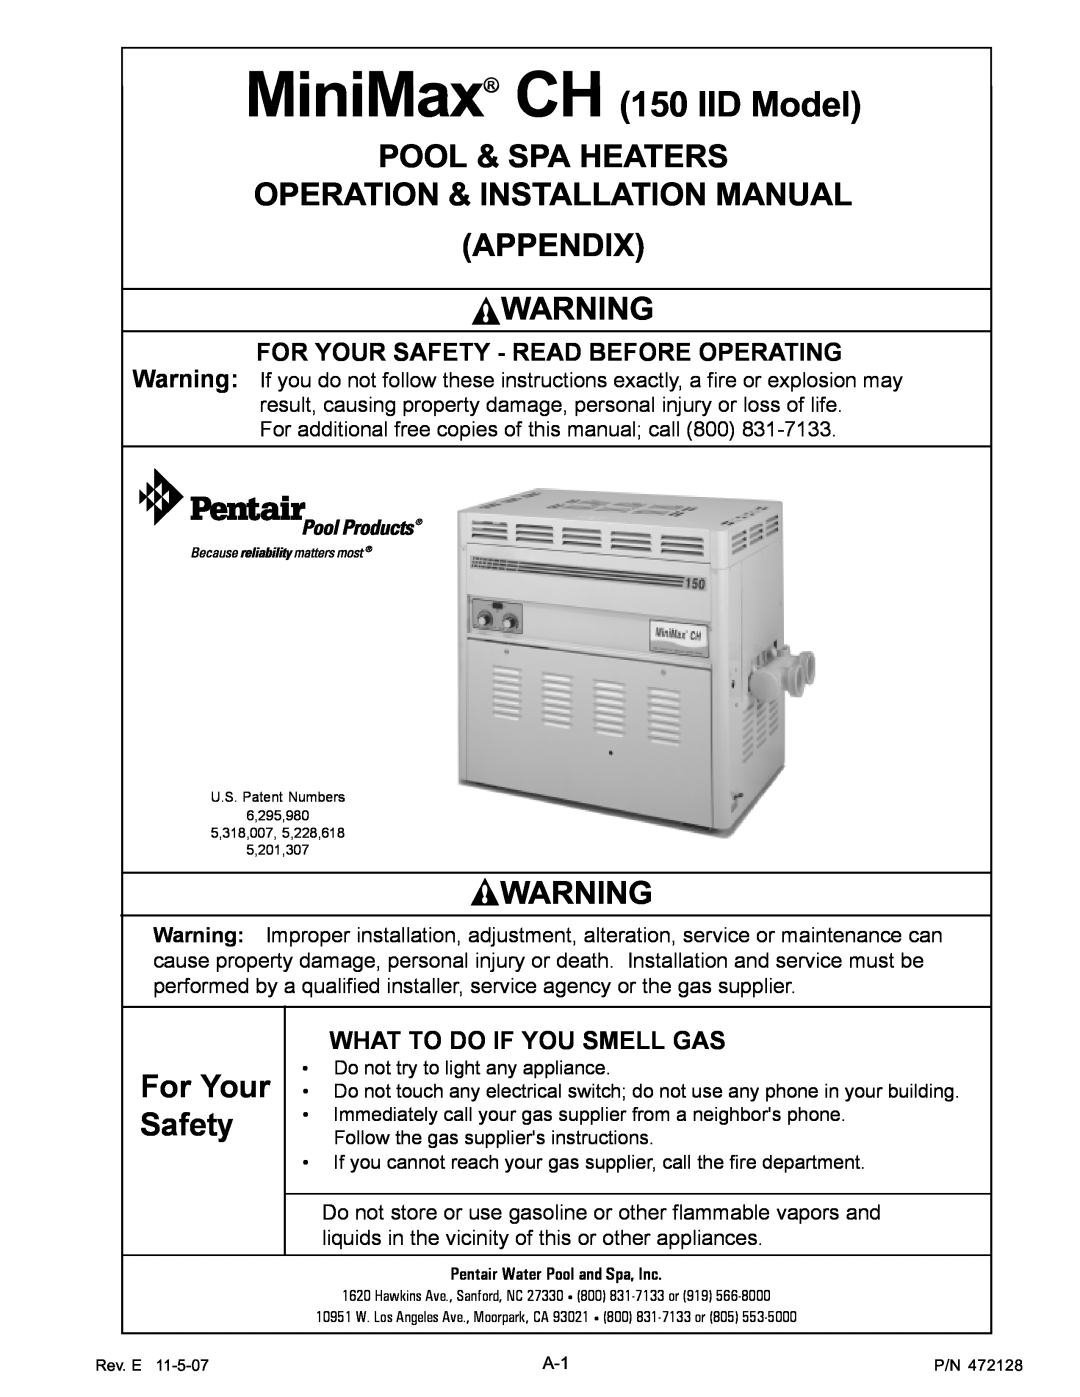 Pentair Hot Tub MiniMax CH 150 IID Model, Pool & Spa Heaters Operation & Installation Manual Appendix, For Your Safety 